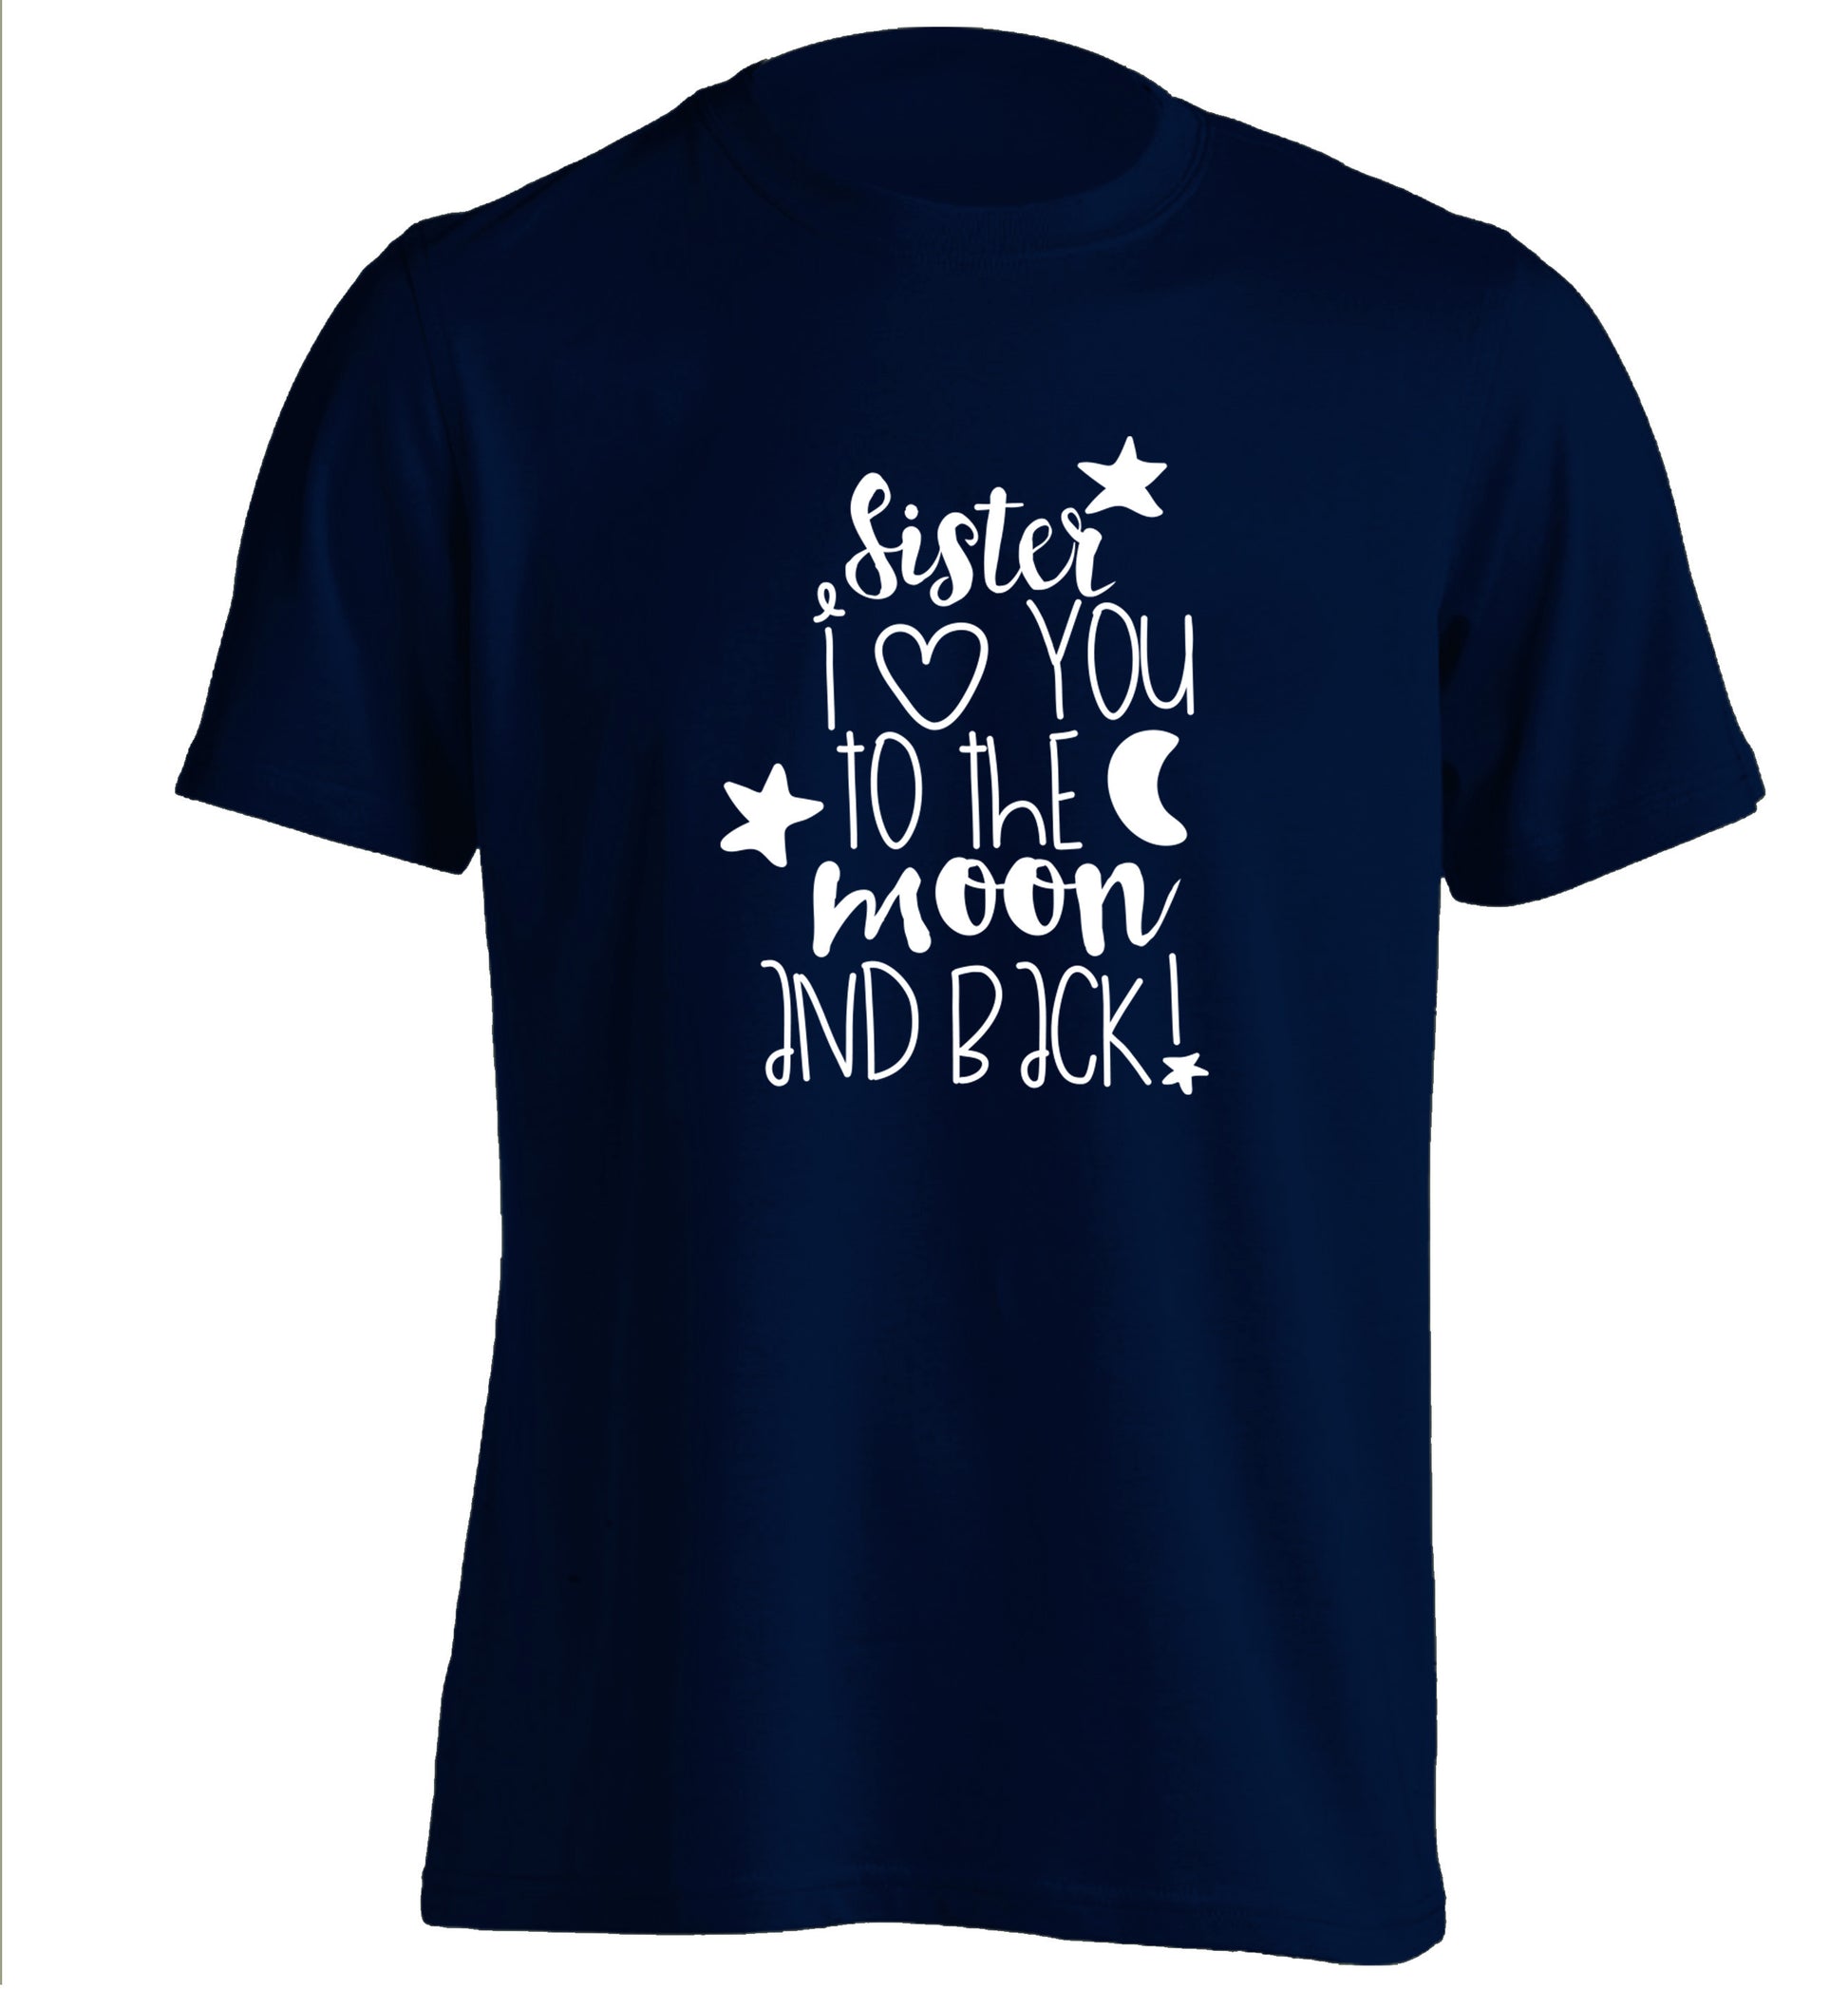 Sister I love you to the moon and back adults unisex navy Tshirt 2XL